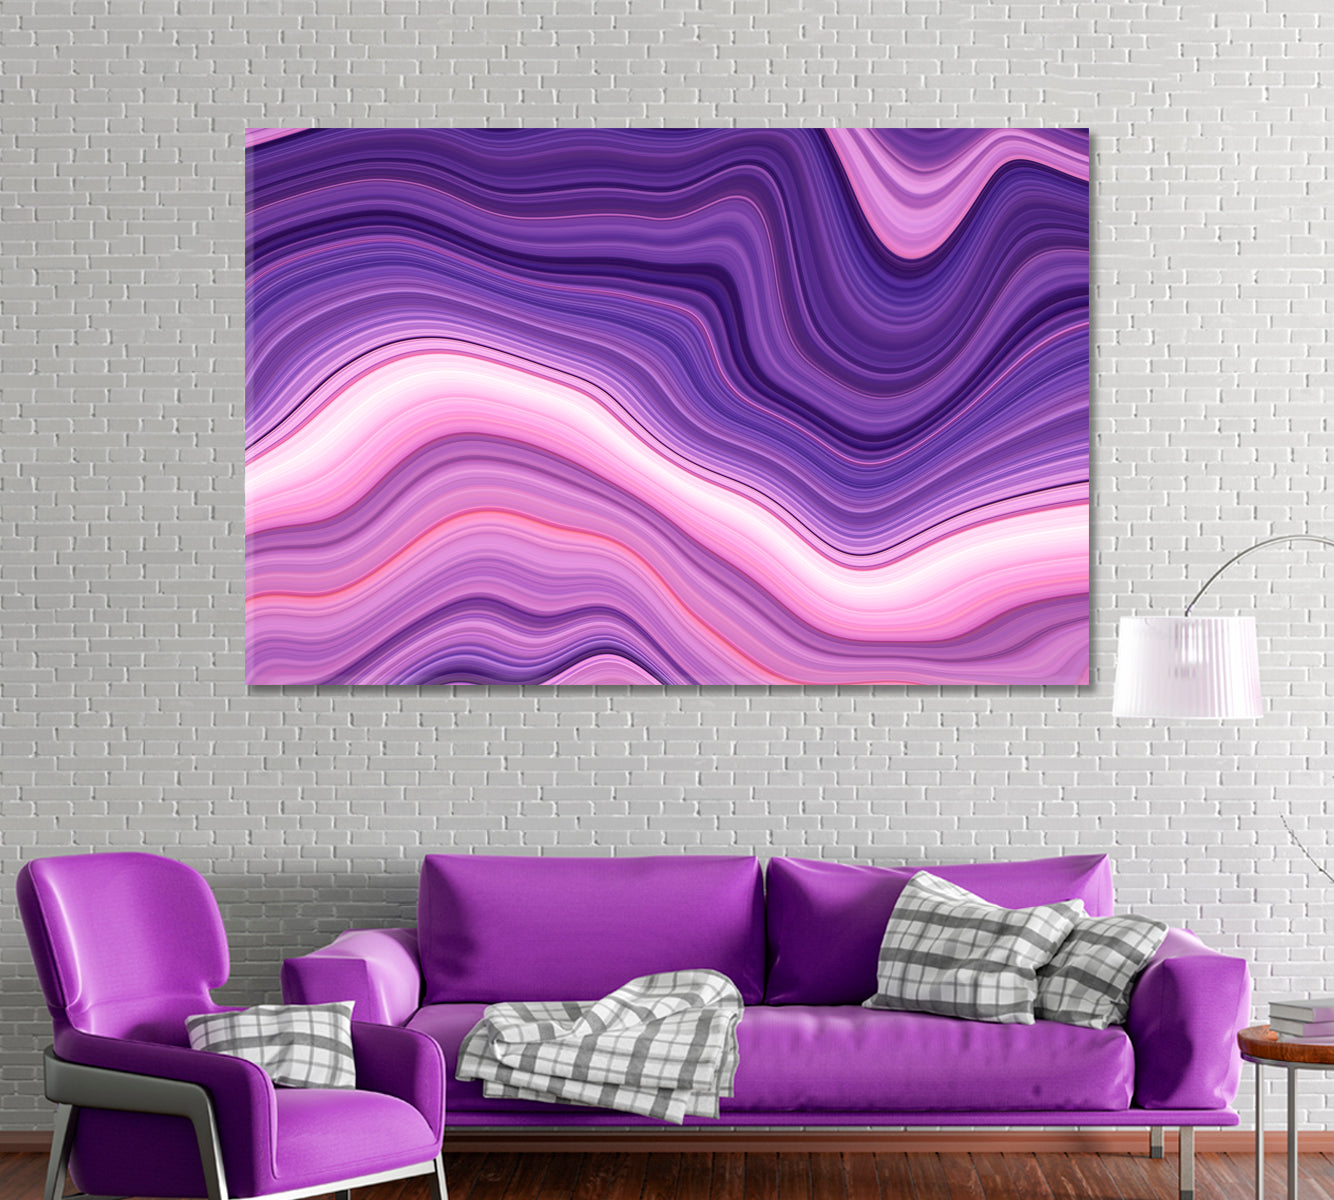 Purple Marble Wavy Pattern Canvas Print ArtLexy 1 Panel 24"x16" inches 